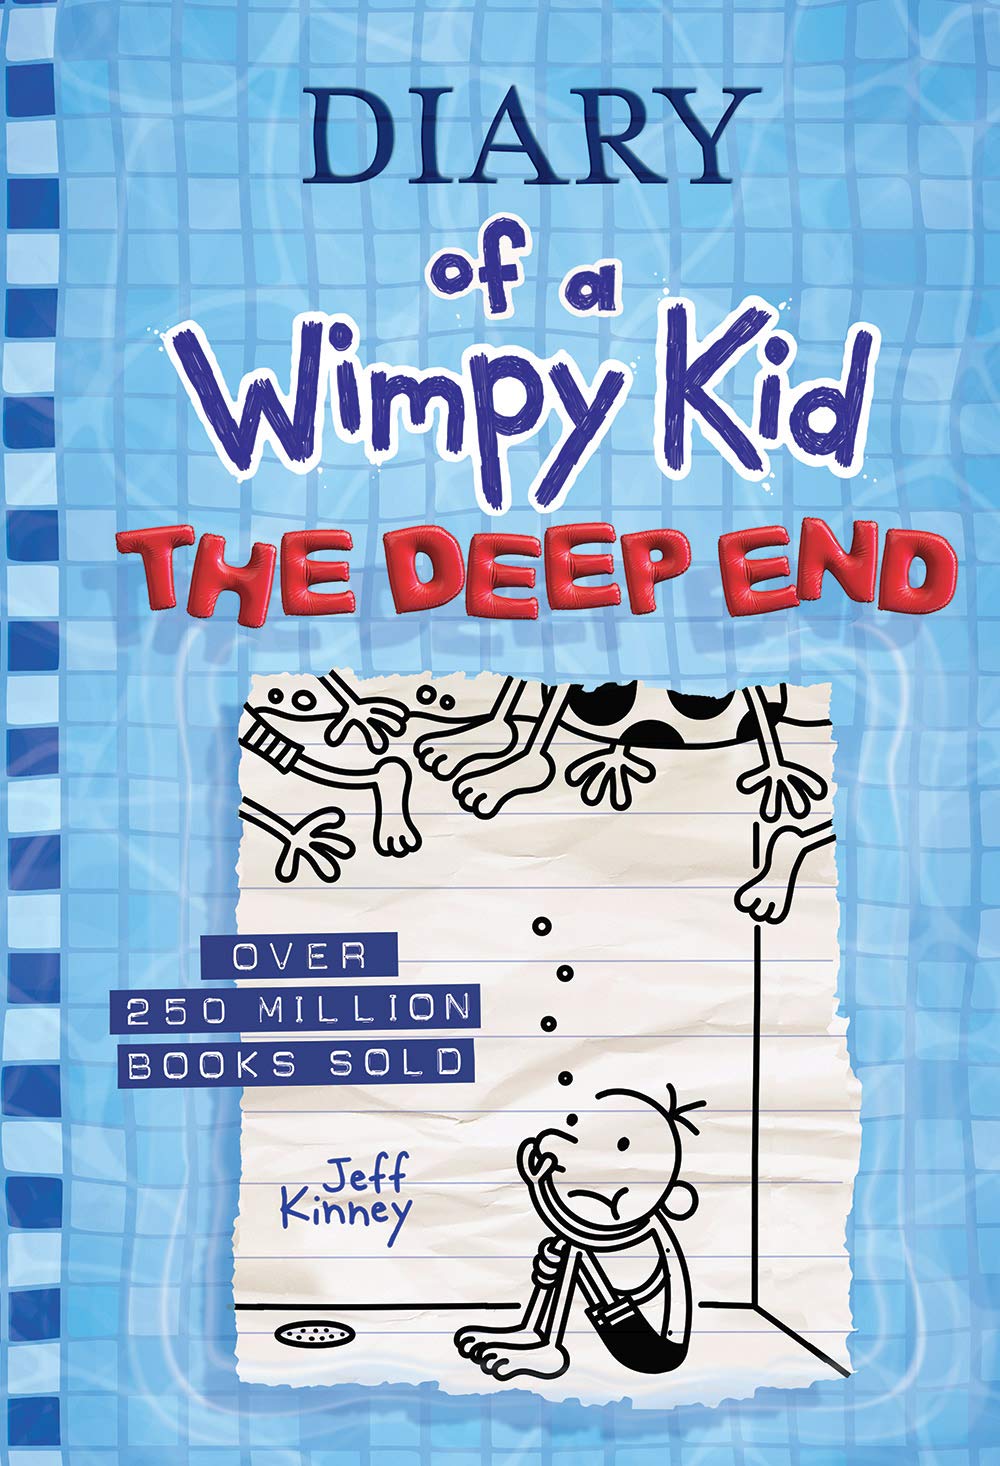 Diary of a Wimpy Kid The Deep End 11.99! PreOrder Guarantee